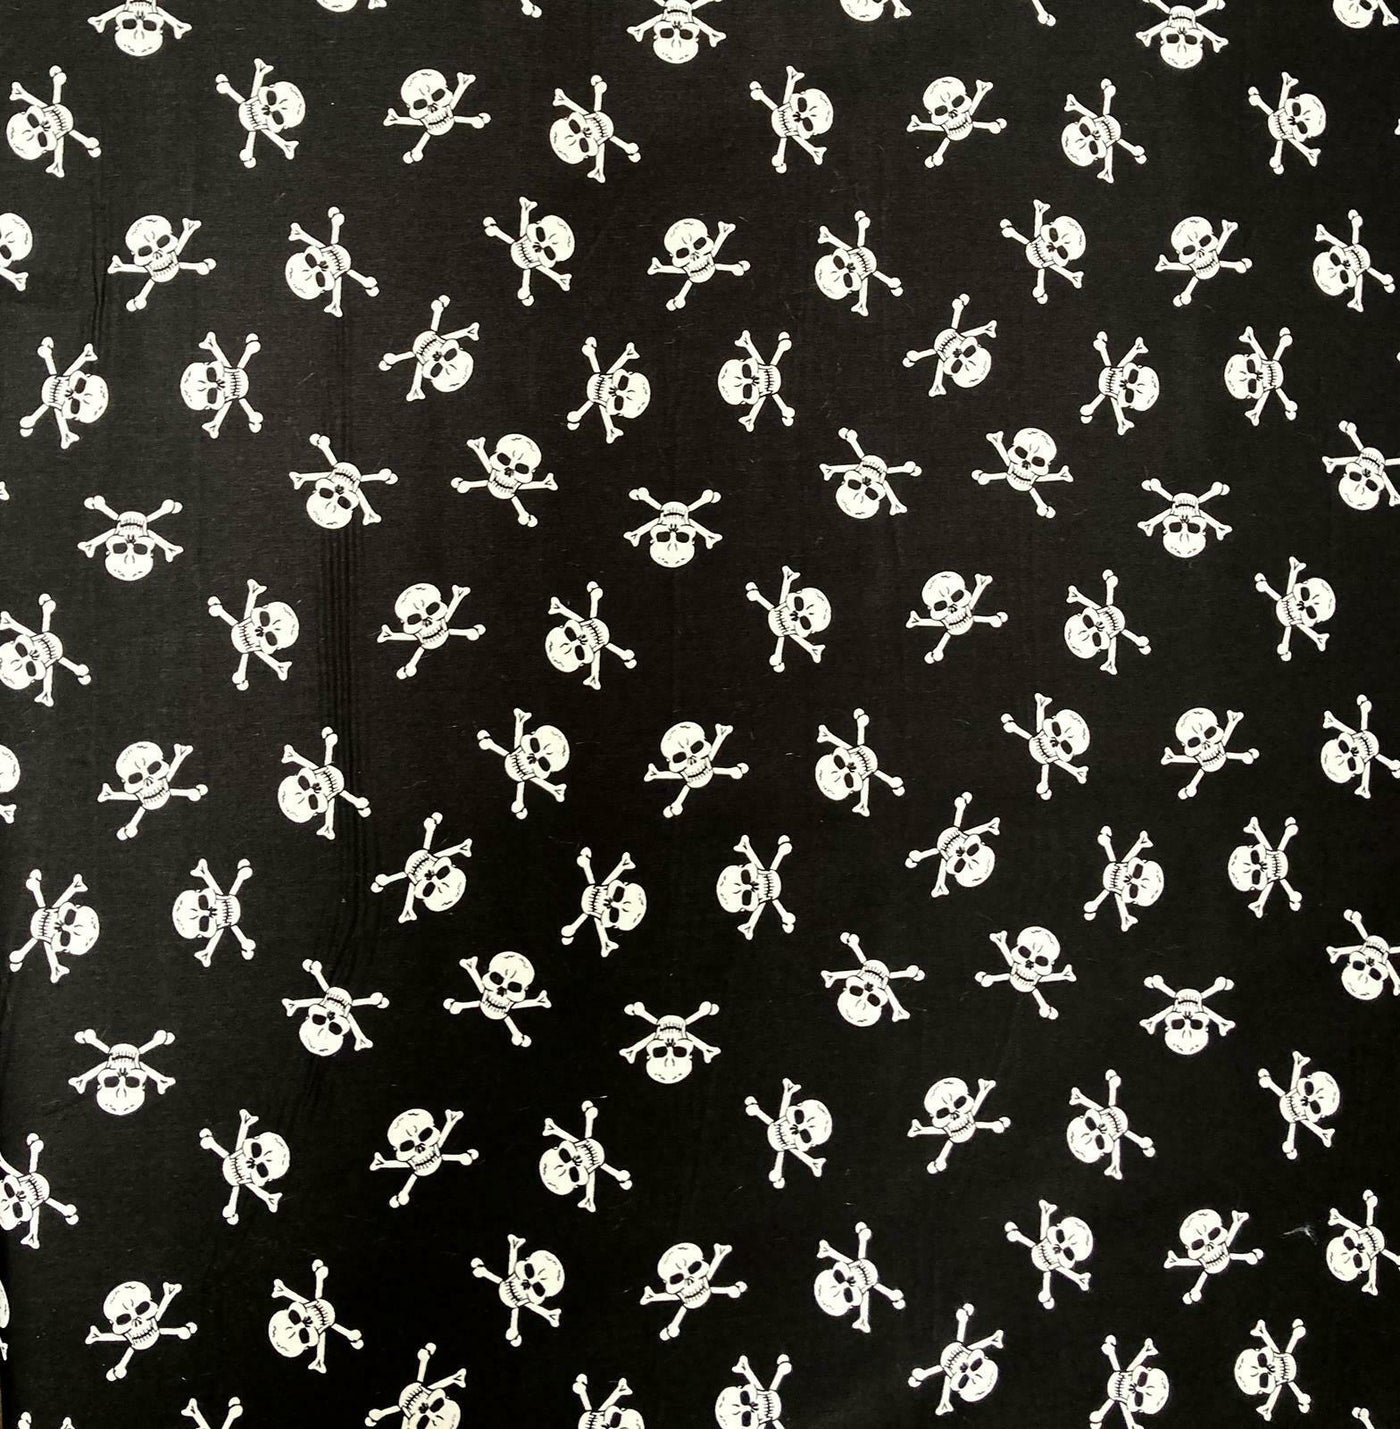 Skull & Crossbones Pirate Rose & Hubble Cotton Fabric for Face Masks